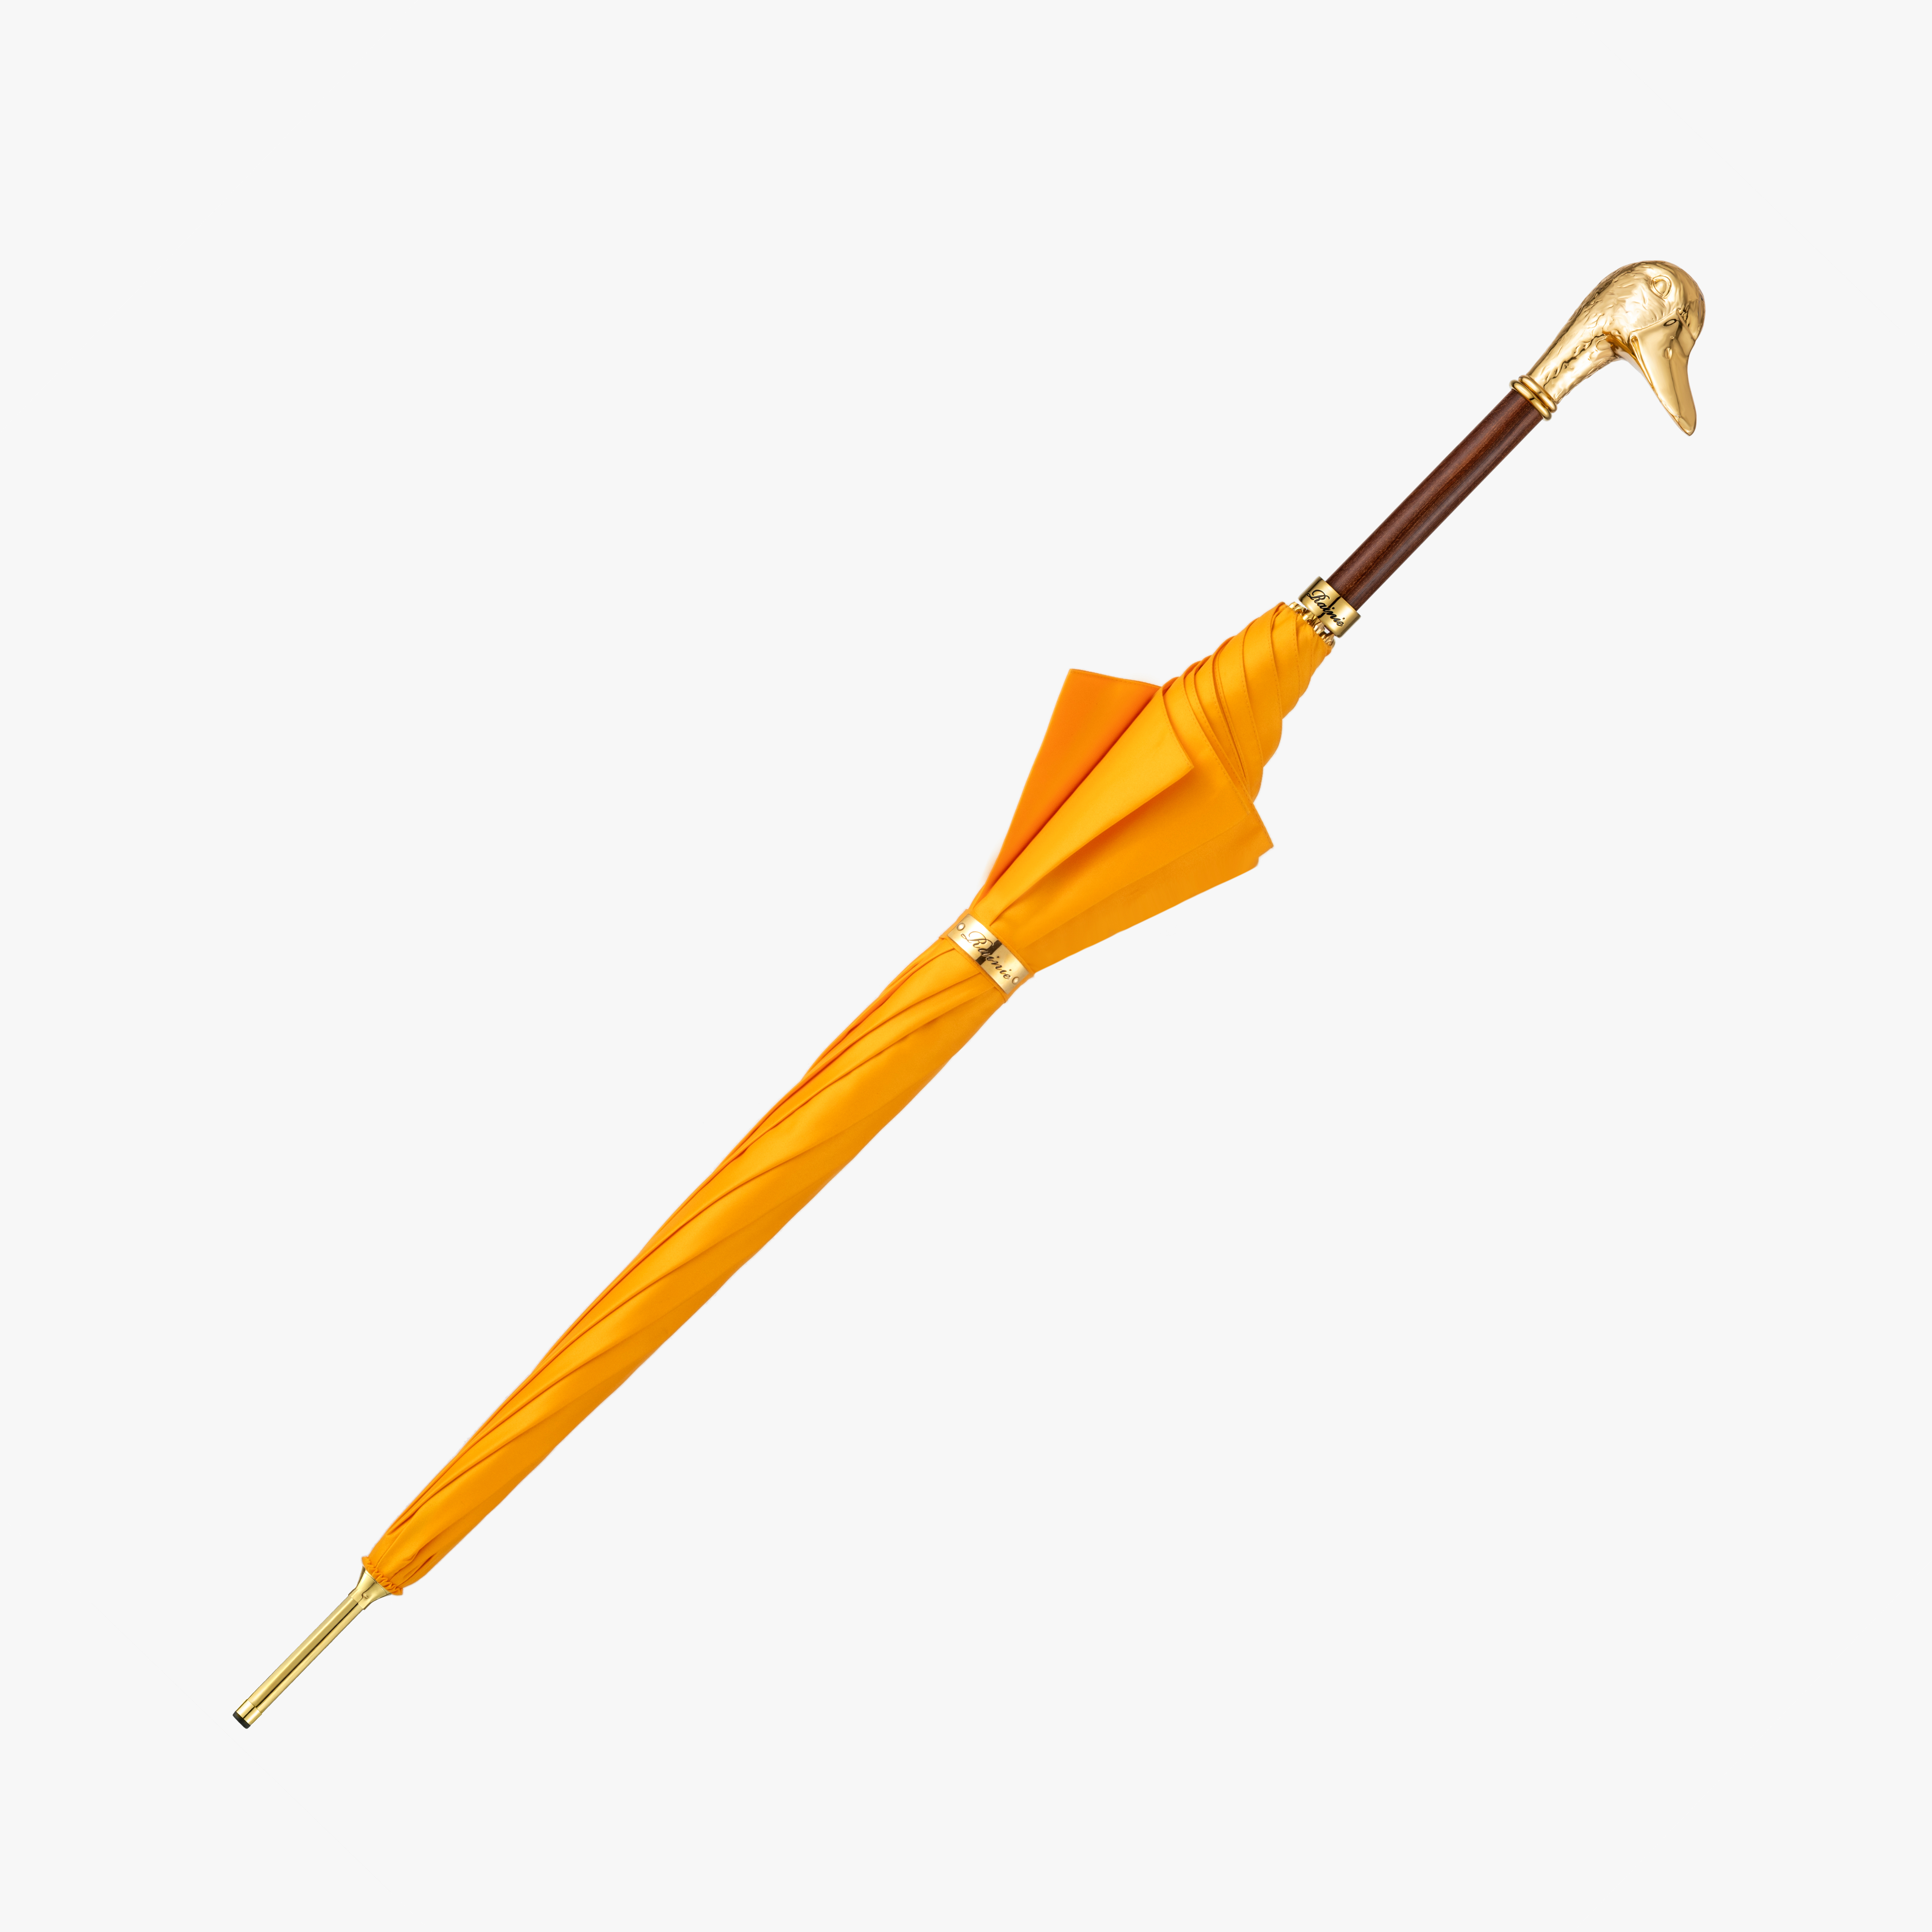 Duck umbrella with a straight handle